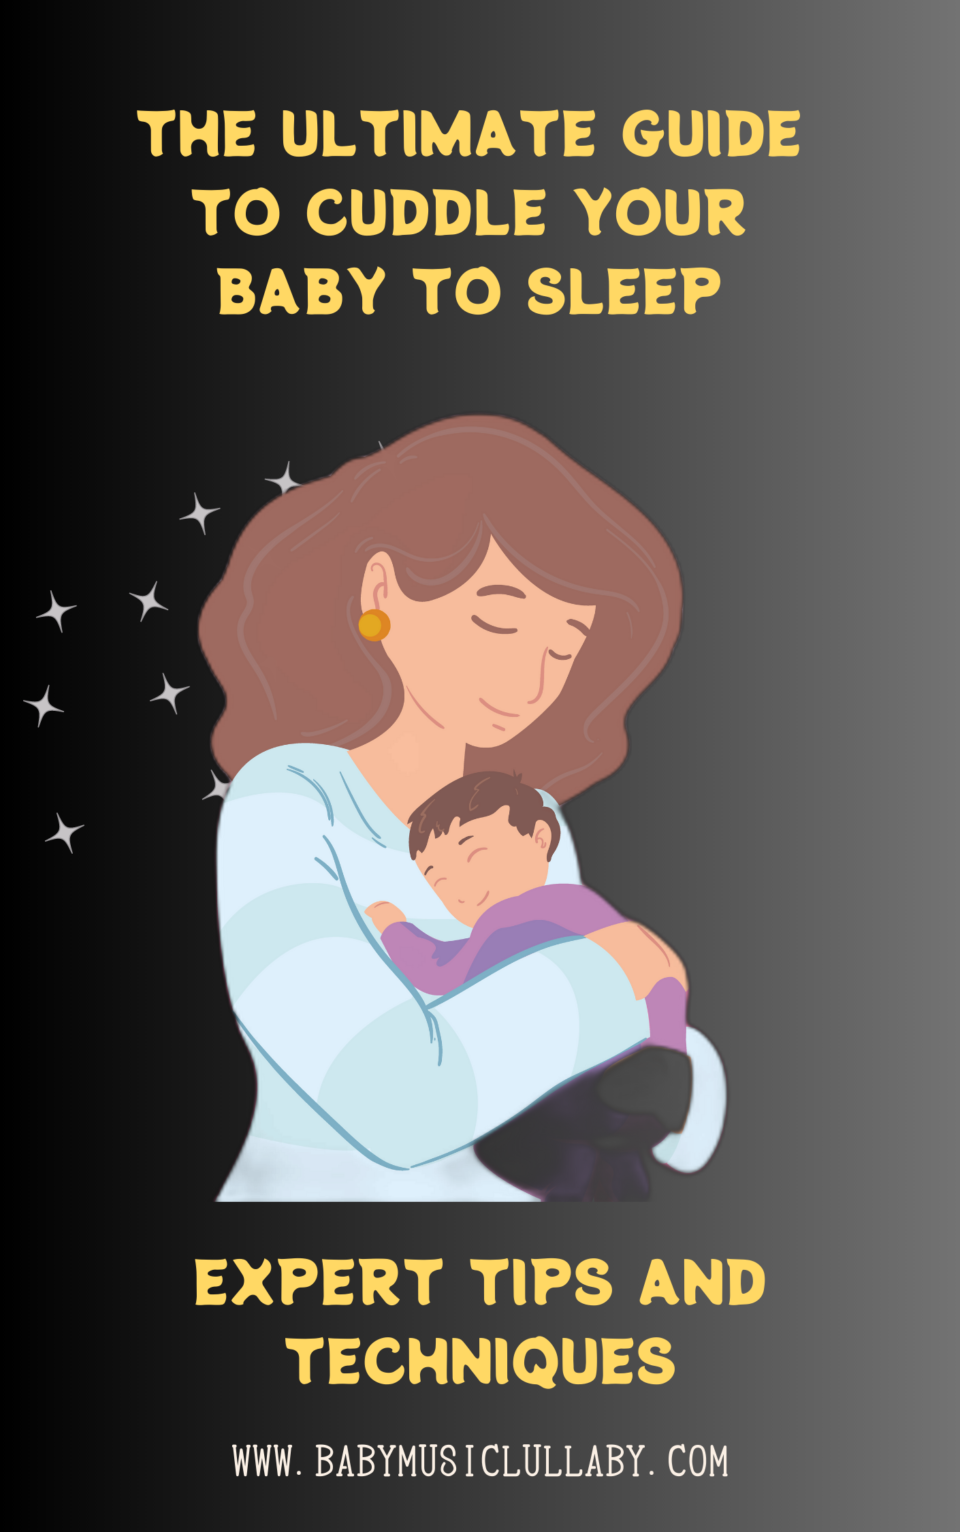 Get the ultimate resource for parents with 'The Ultimate Guide to Cuddle Your Baby to Sleep.' This comprehensive PDF provides valuable tips, techniques, and insights to help your baby sleep soundly through the night.